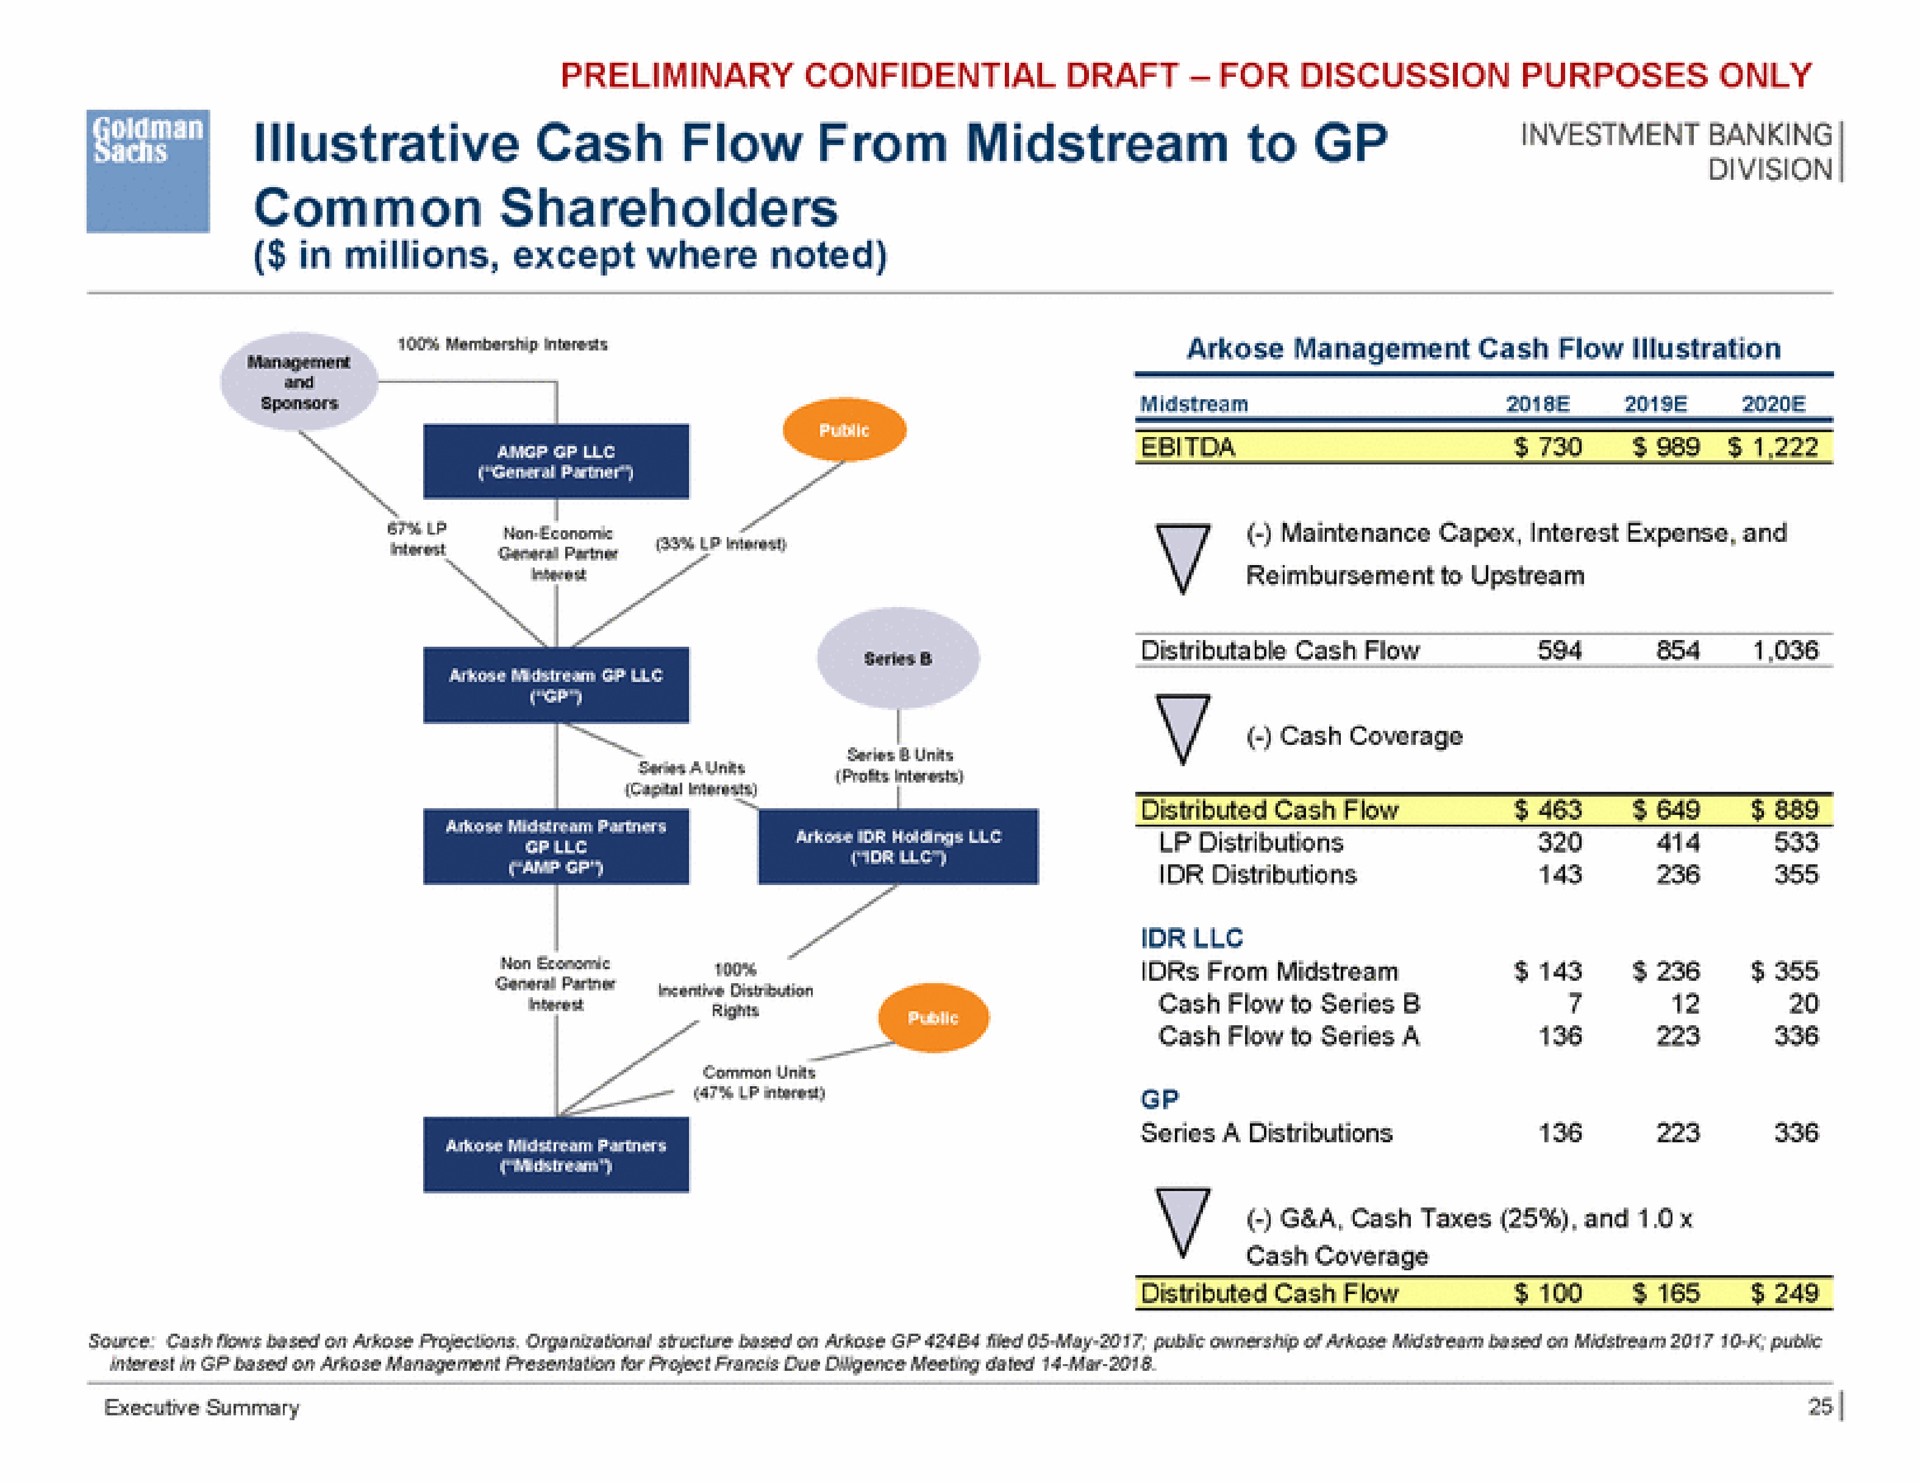 illustrative cash flow from midstream to common shareholders in millions except where noted | Goldman Sachs